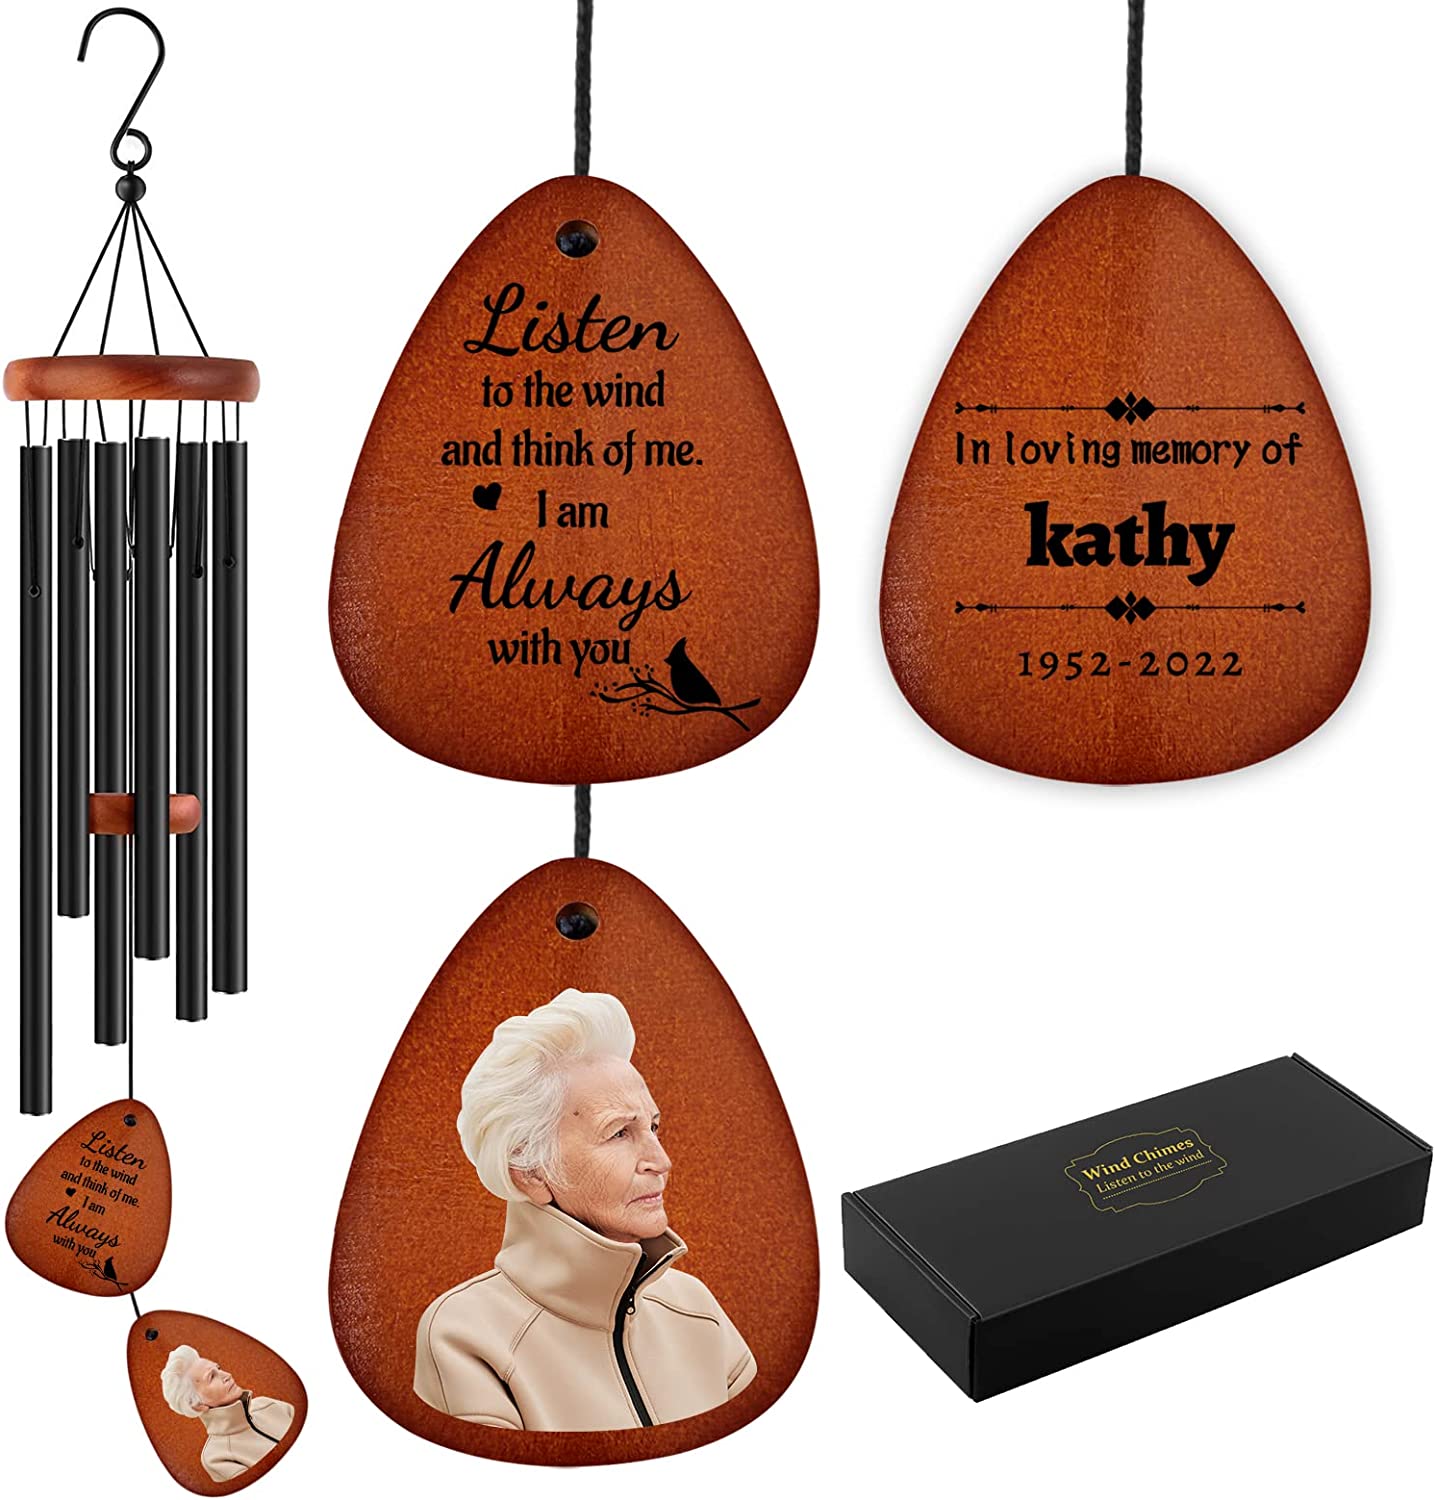 Personalized Memorial Wind Chimes for Loss of Loved One, Personalized Memorial Gifts Listen to the wind and think of me